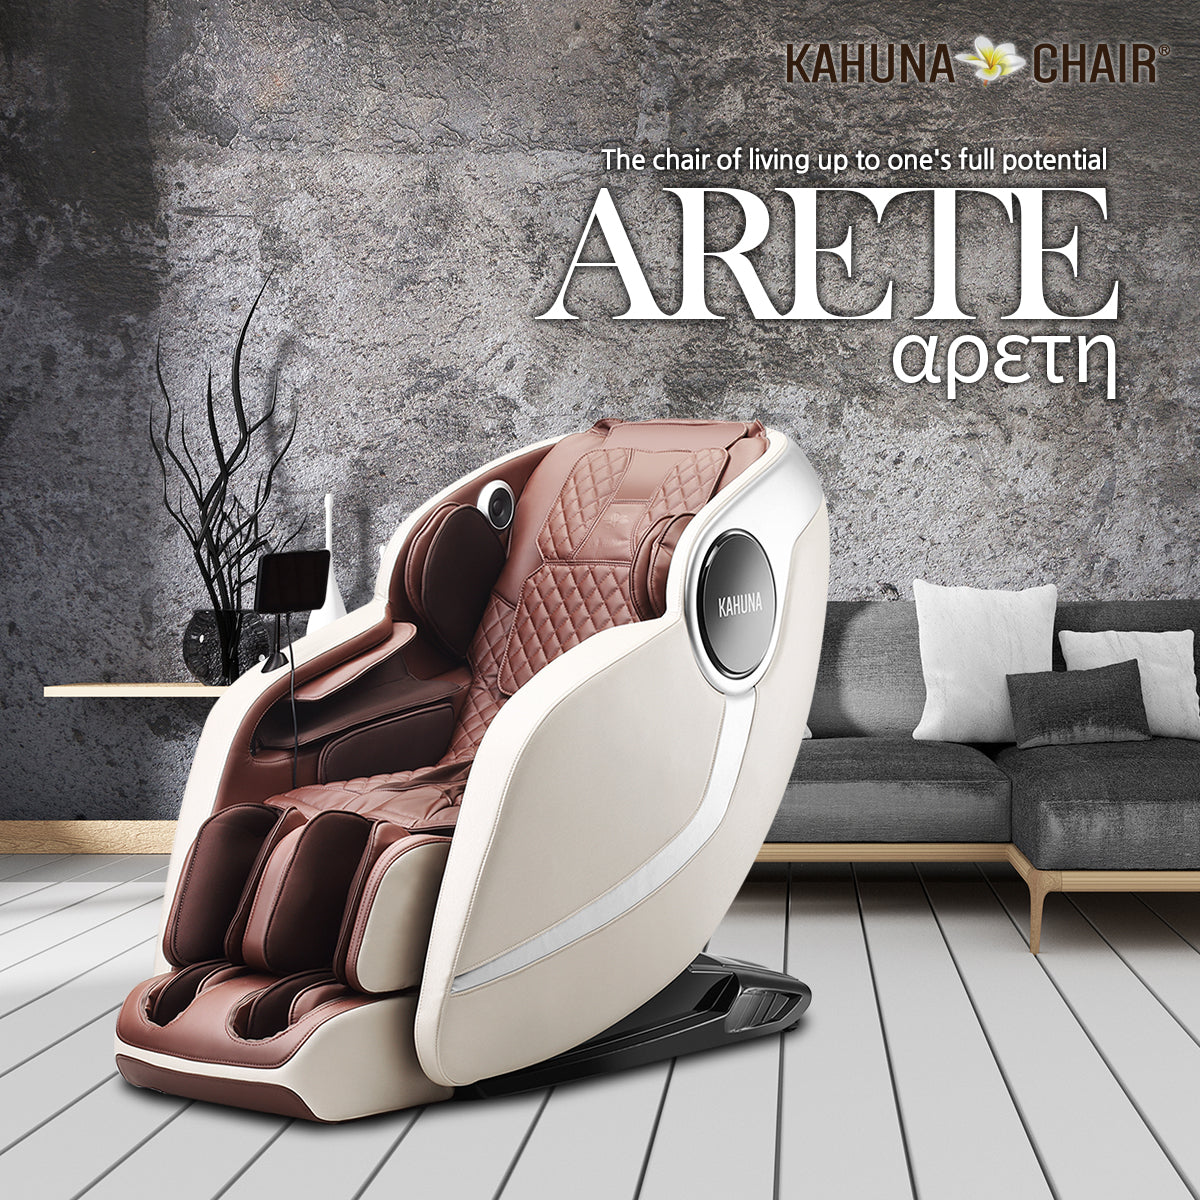 kahuna Em Arete Massage chair the chair of living to one full potential